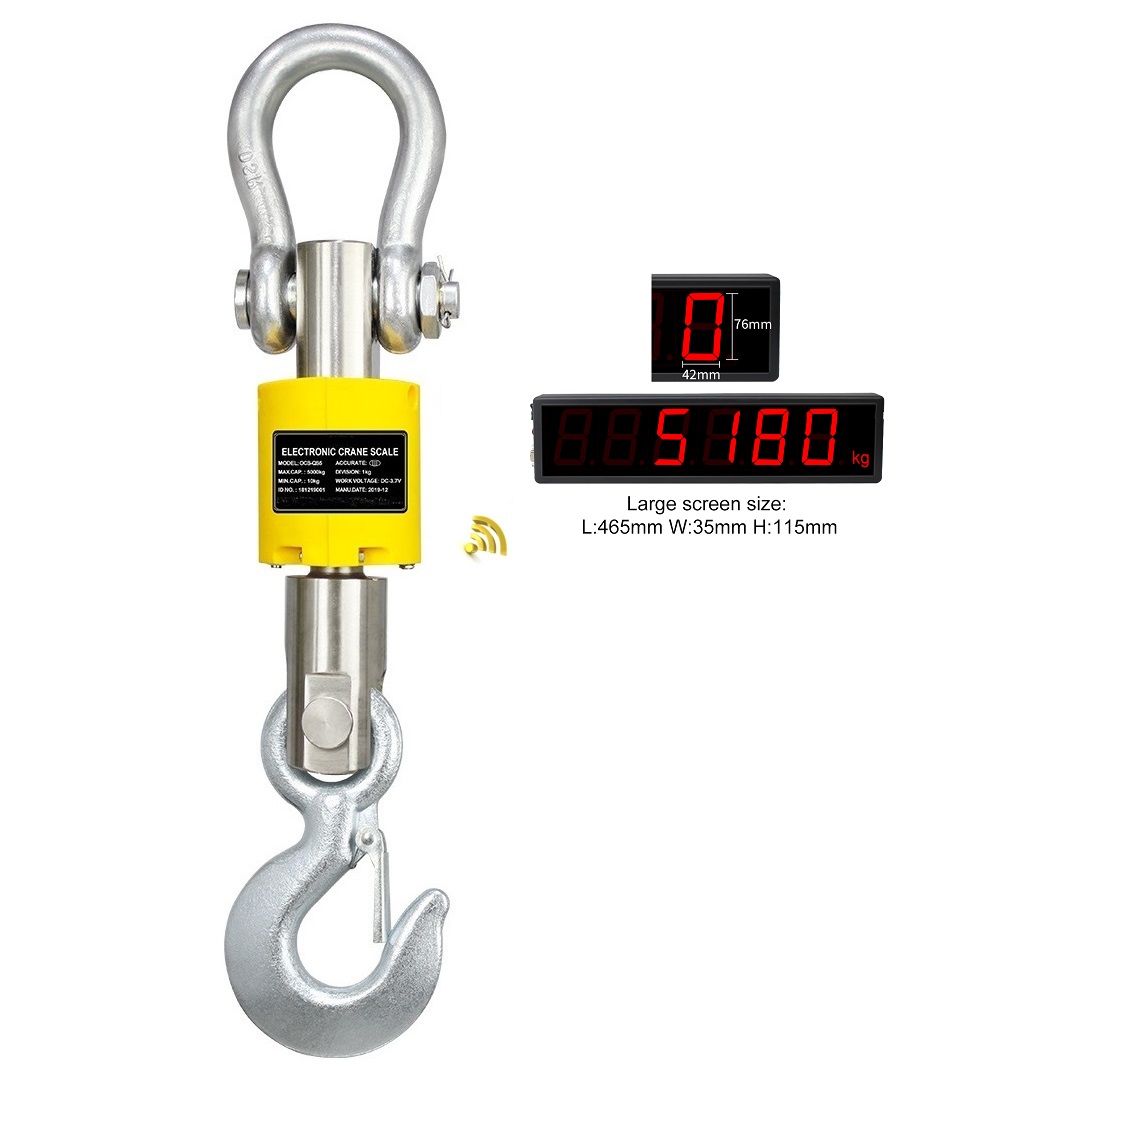 3T Electronic Hanging Scale Digital Crane Scale Wireless Weighing Scales